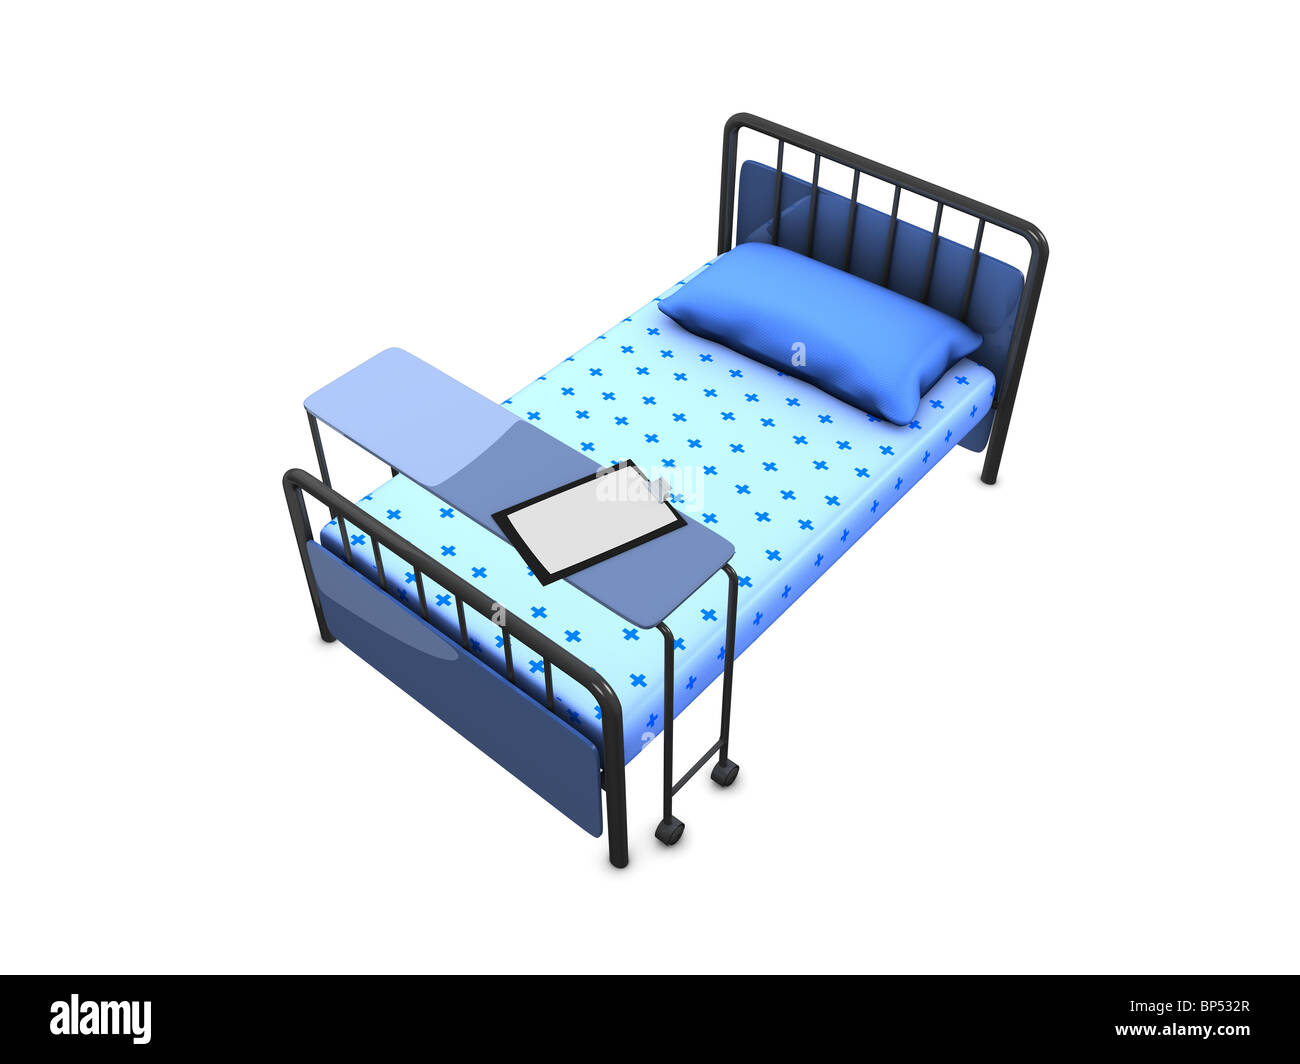 3d empty hospital bed isolated over white background Stock Photo - Alamy